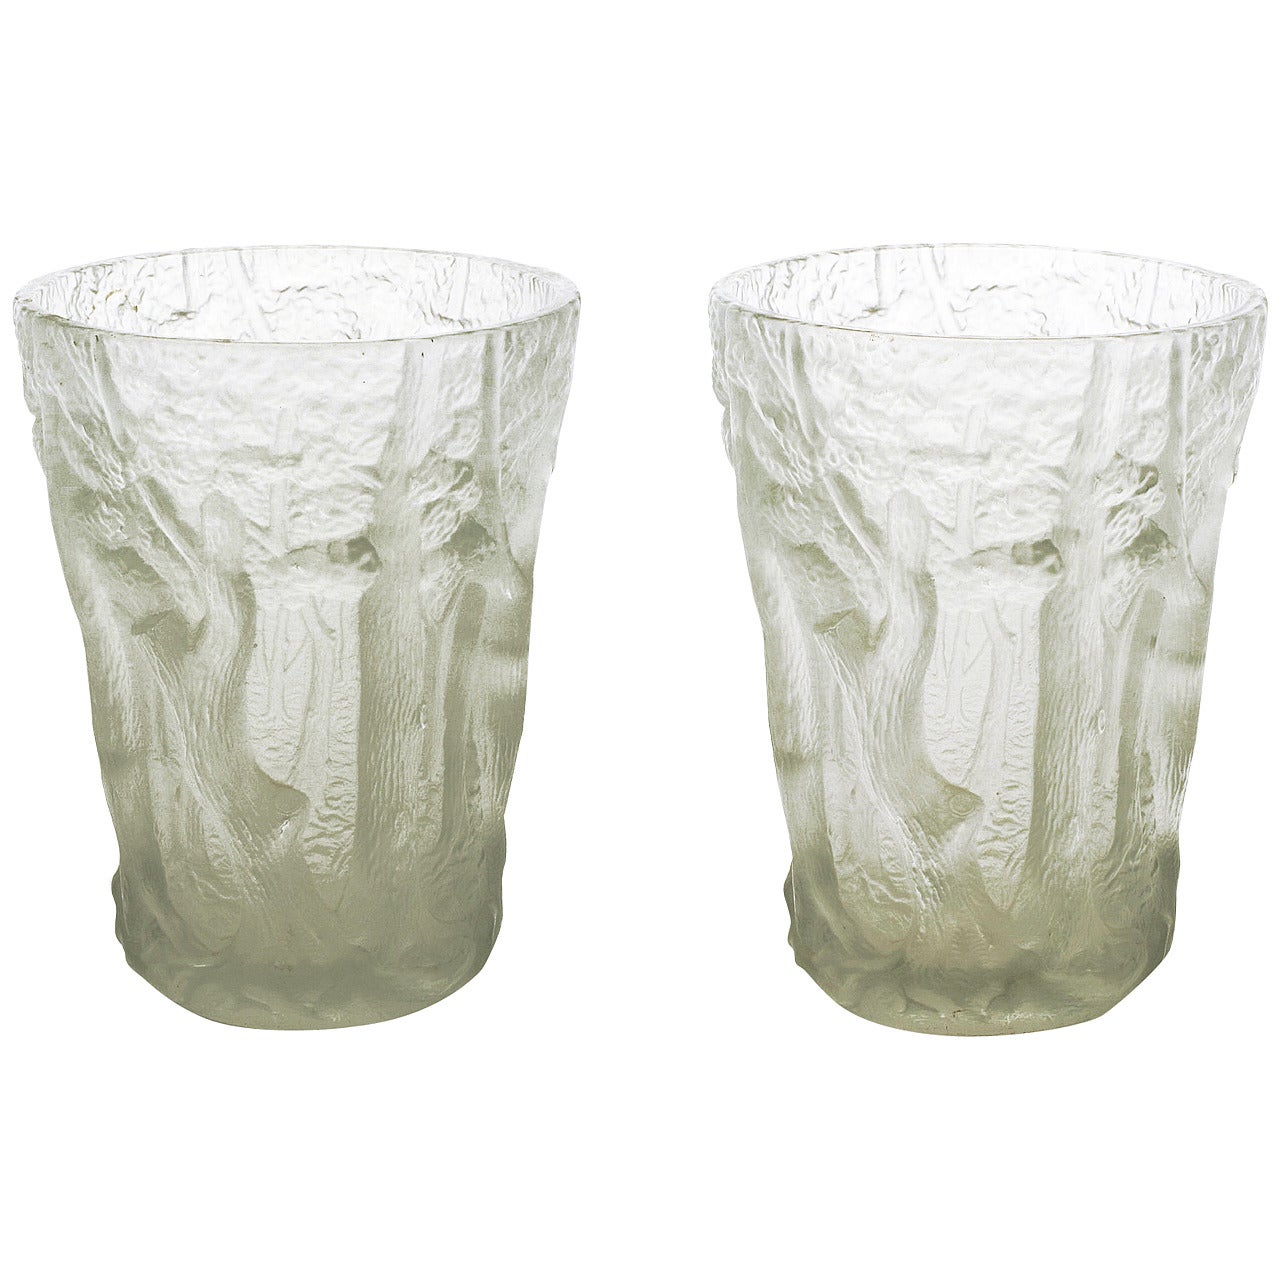 Pair of Josef Inwald, "In the Forest" Borlac Glass Vases with Relief